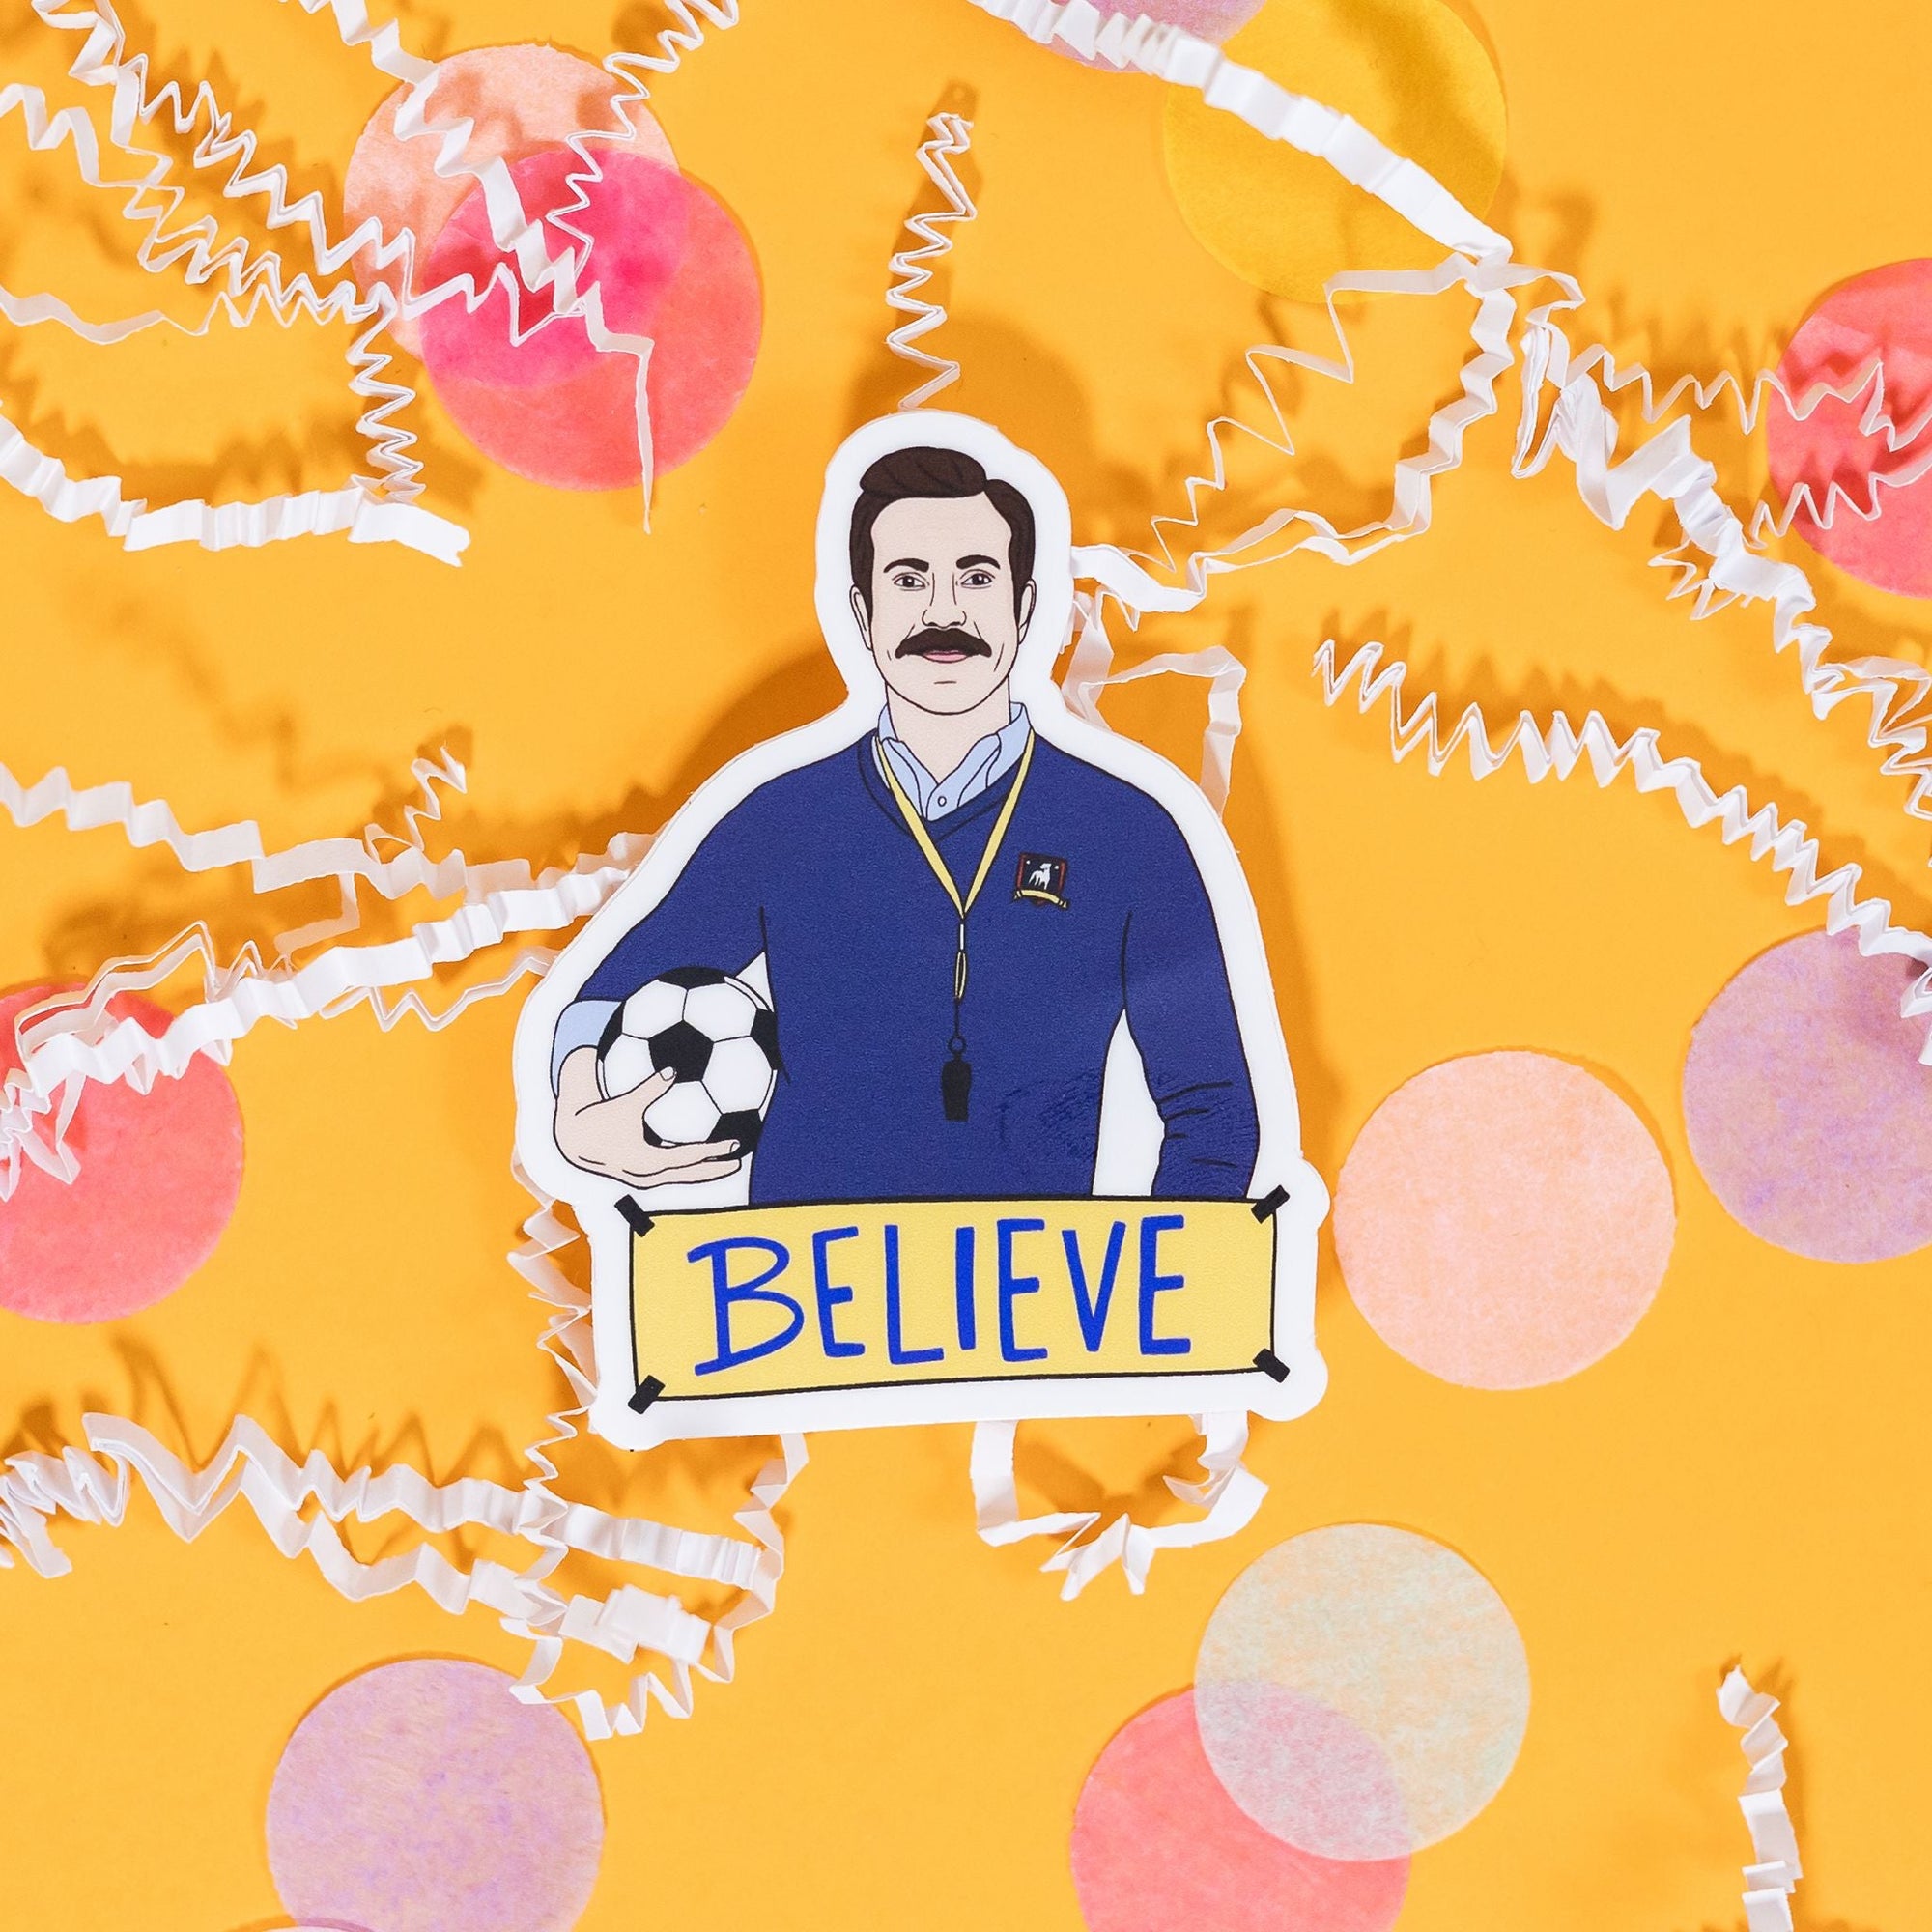 On a sunny mustard background sits a sticker with white crinkle and big, colorful confetti scattered around. This sticker is an illustration of Ted Lasso holding a futbol with a sign at the bottom that says "BELIEVE" in blue handwritten lettering. The colors are in navy, yellow, blue, and light blue with black and white. 2"-3"